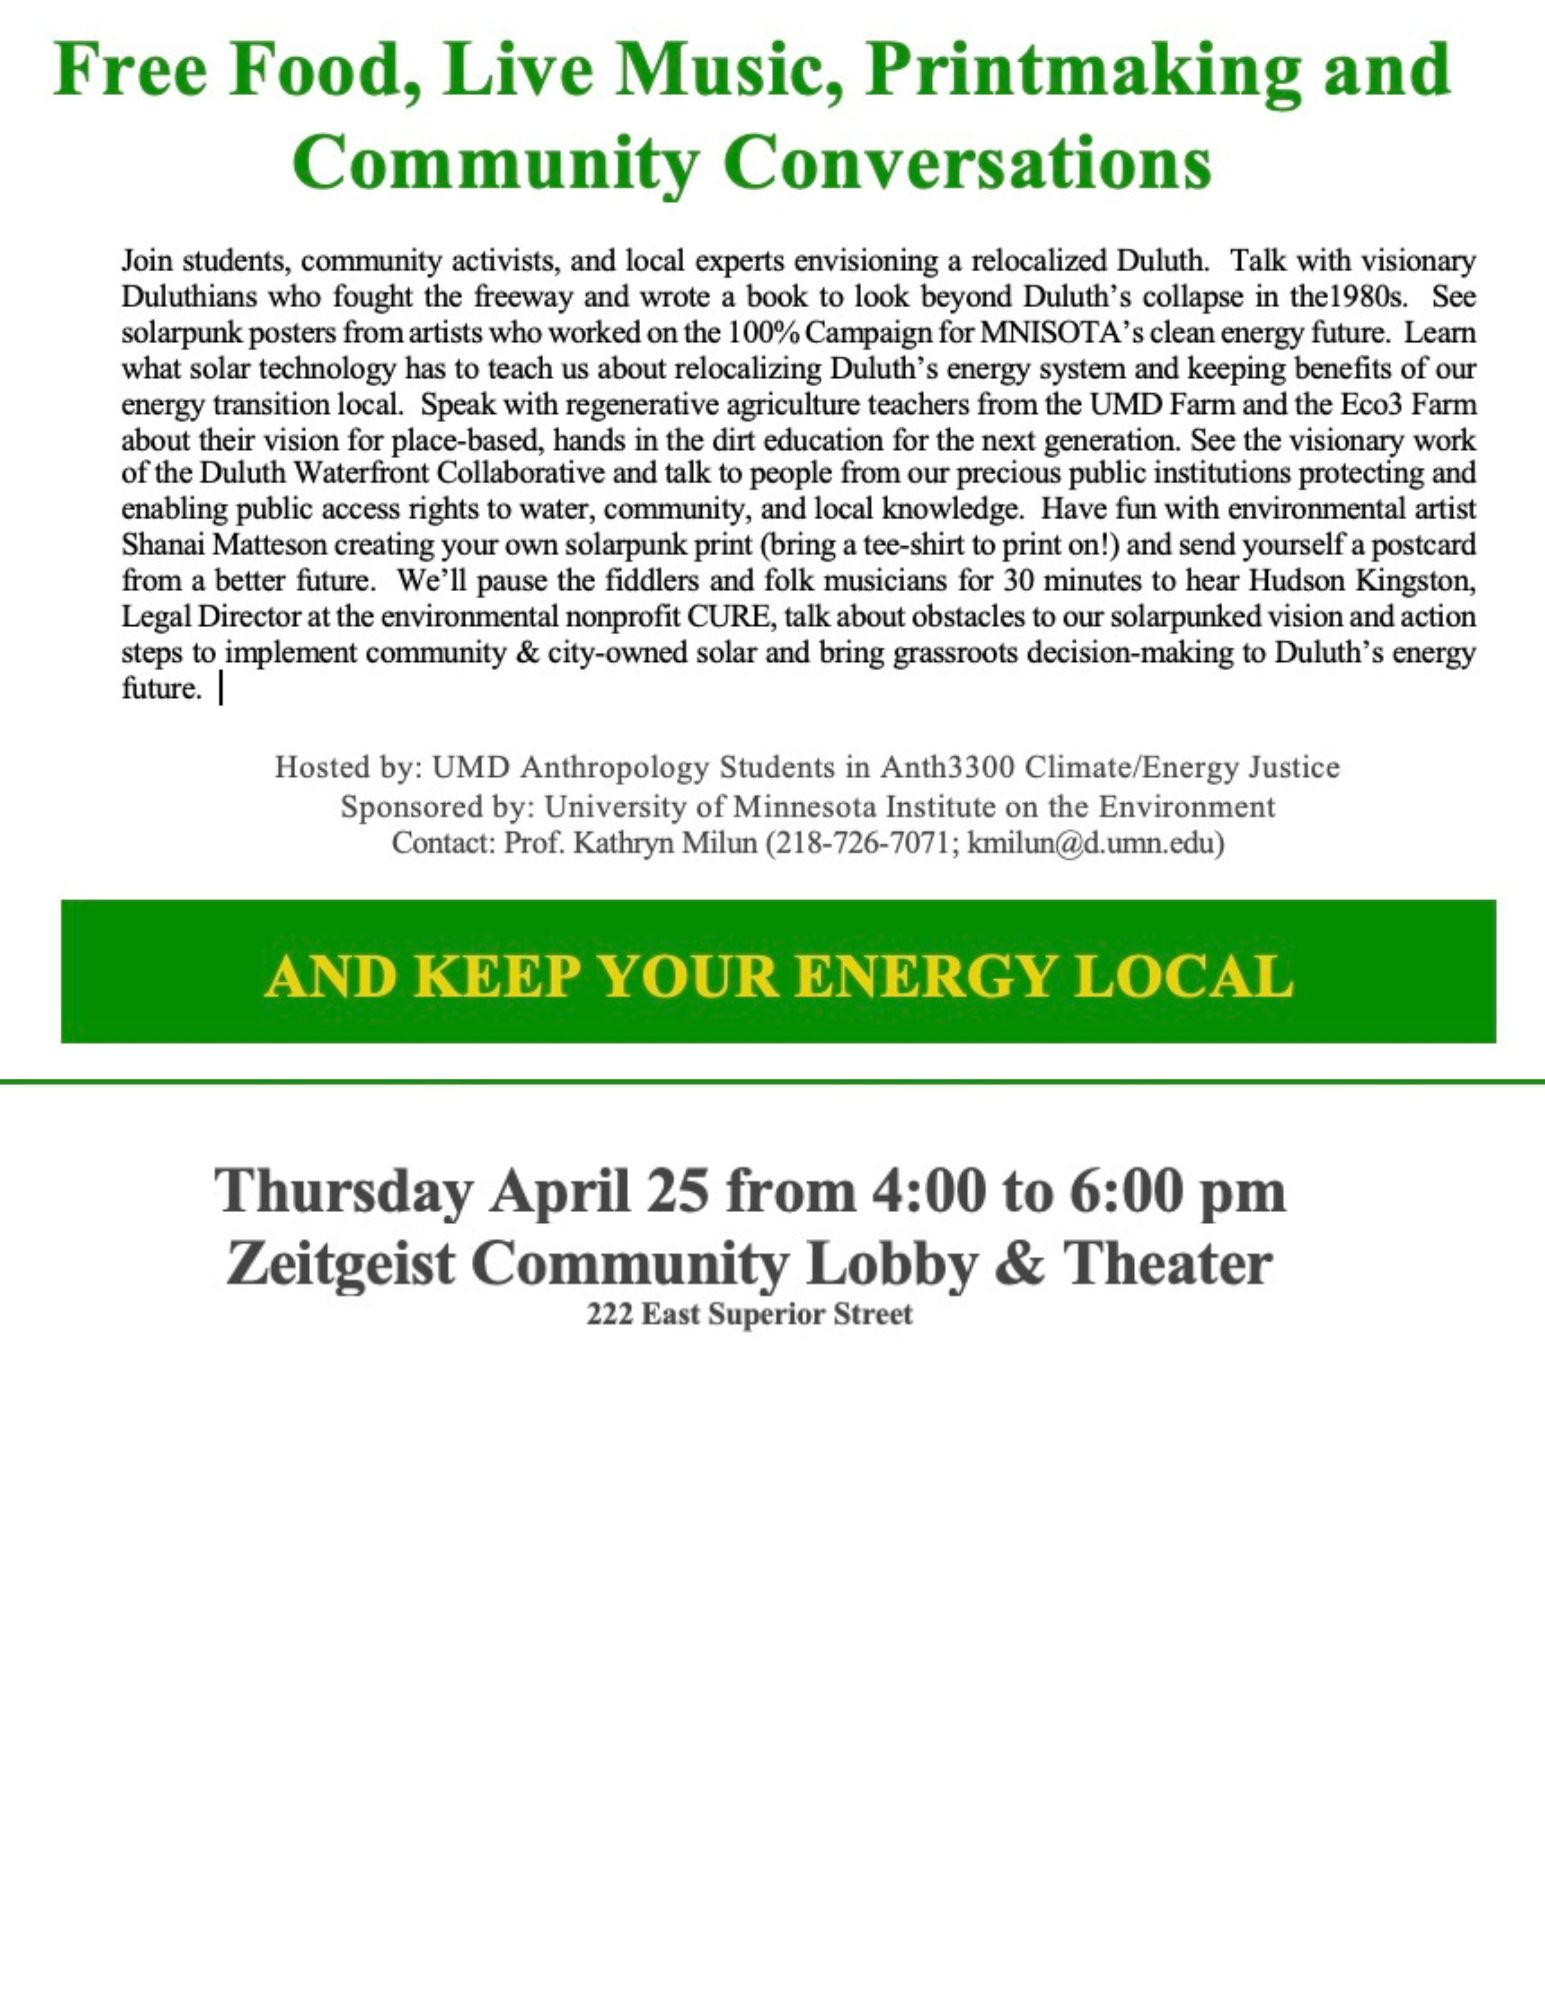 image of green and white flyer with details for the solarpunking Duluth event.